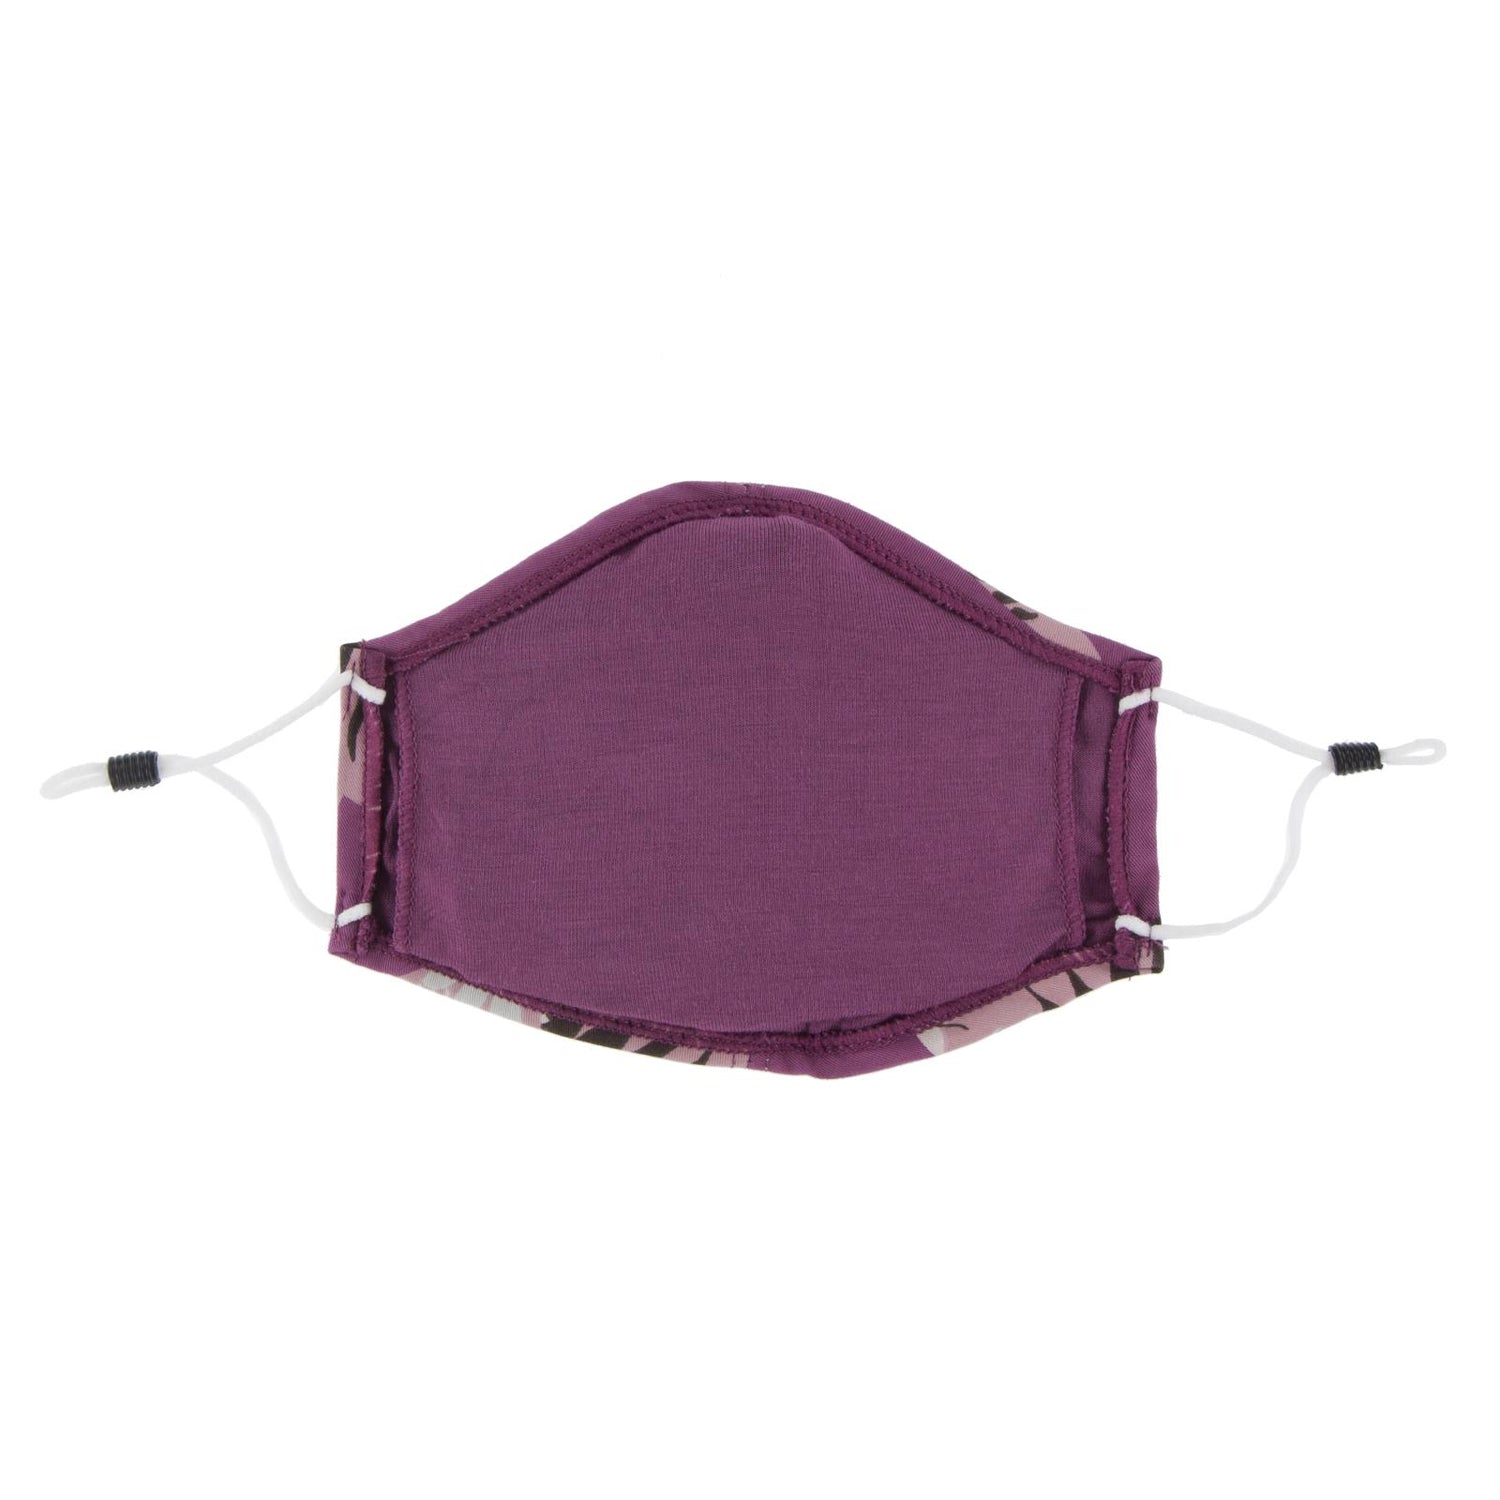 Print Waterproof Mask with Covered Vent and Filter for Adults in Amethyst Kosmoceratops